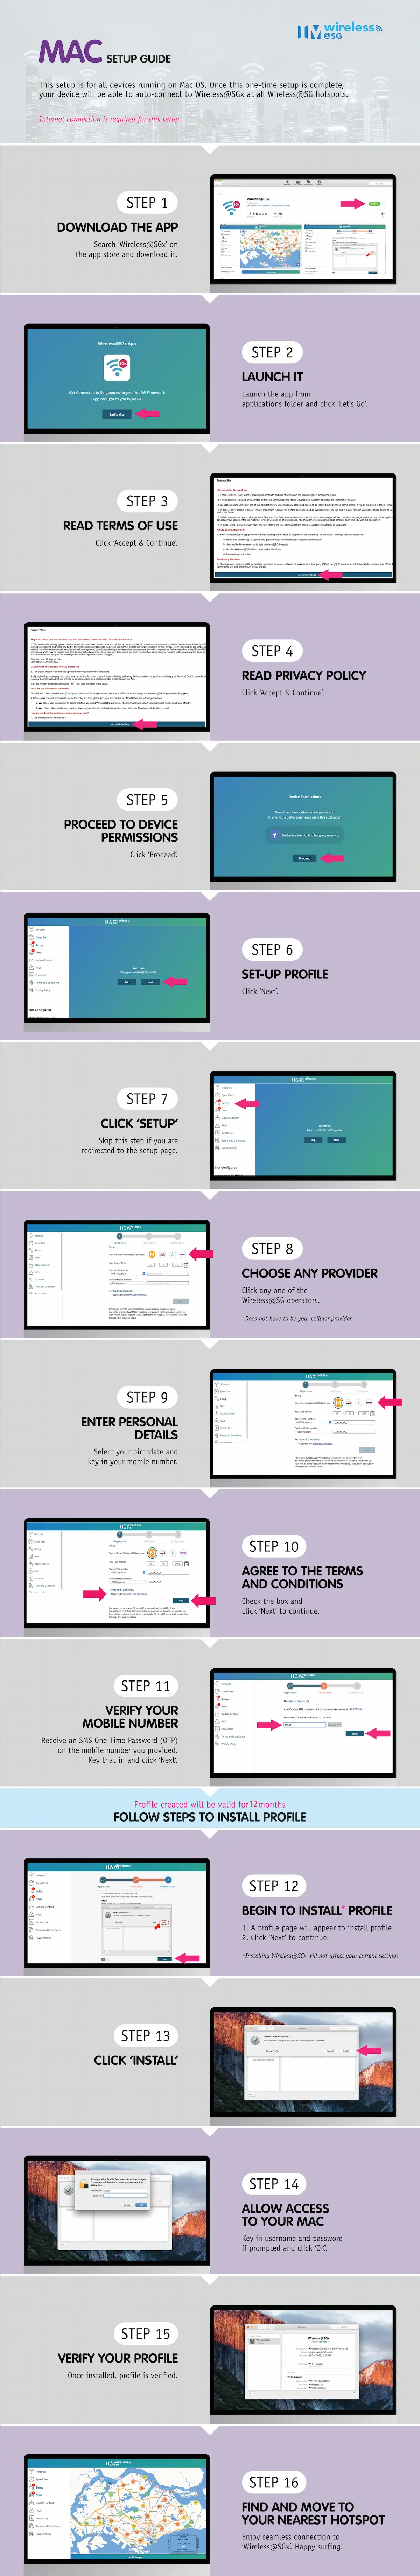 Wireless@SGx app step-by-step infographic setup guide for macOS device